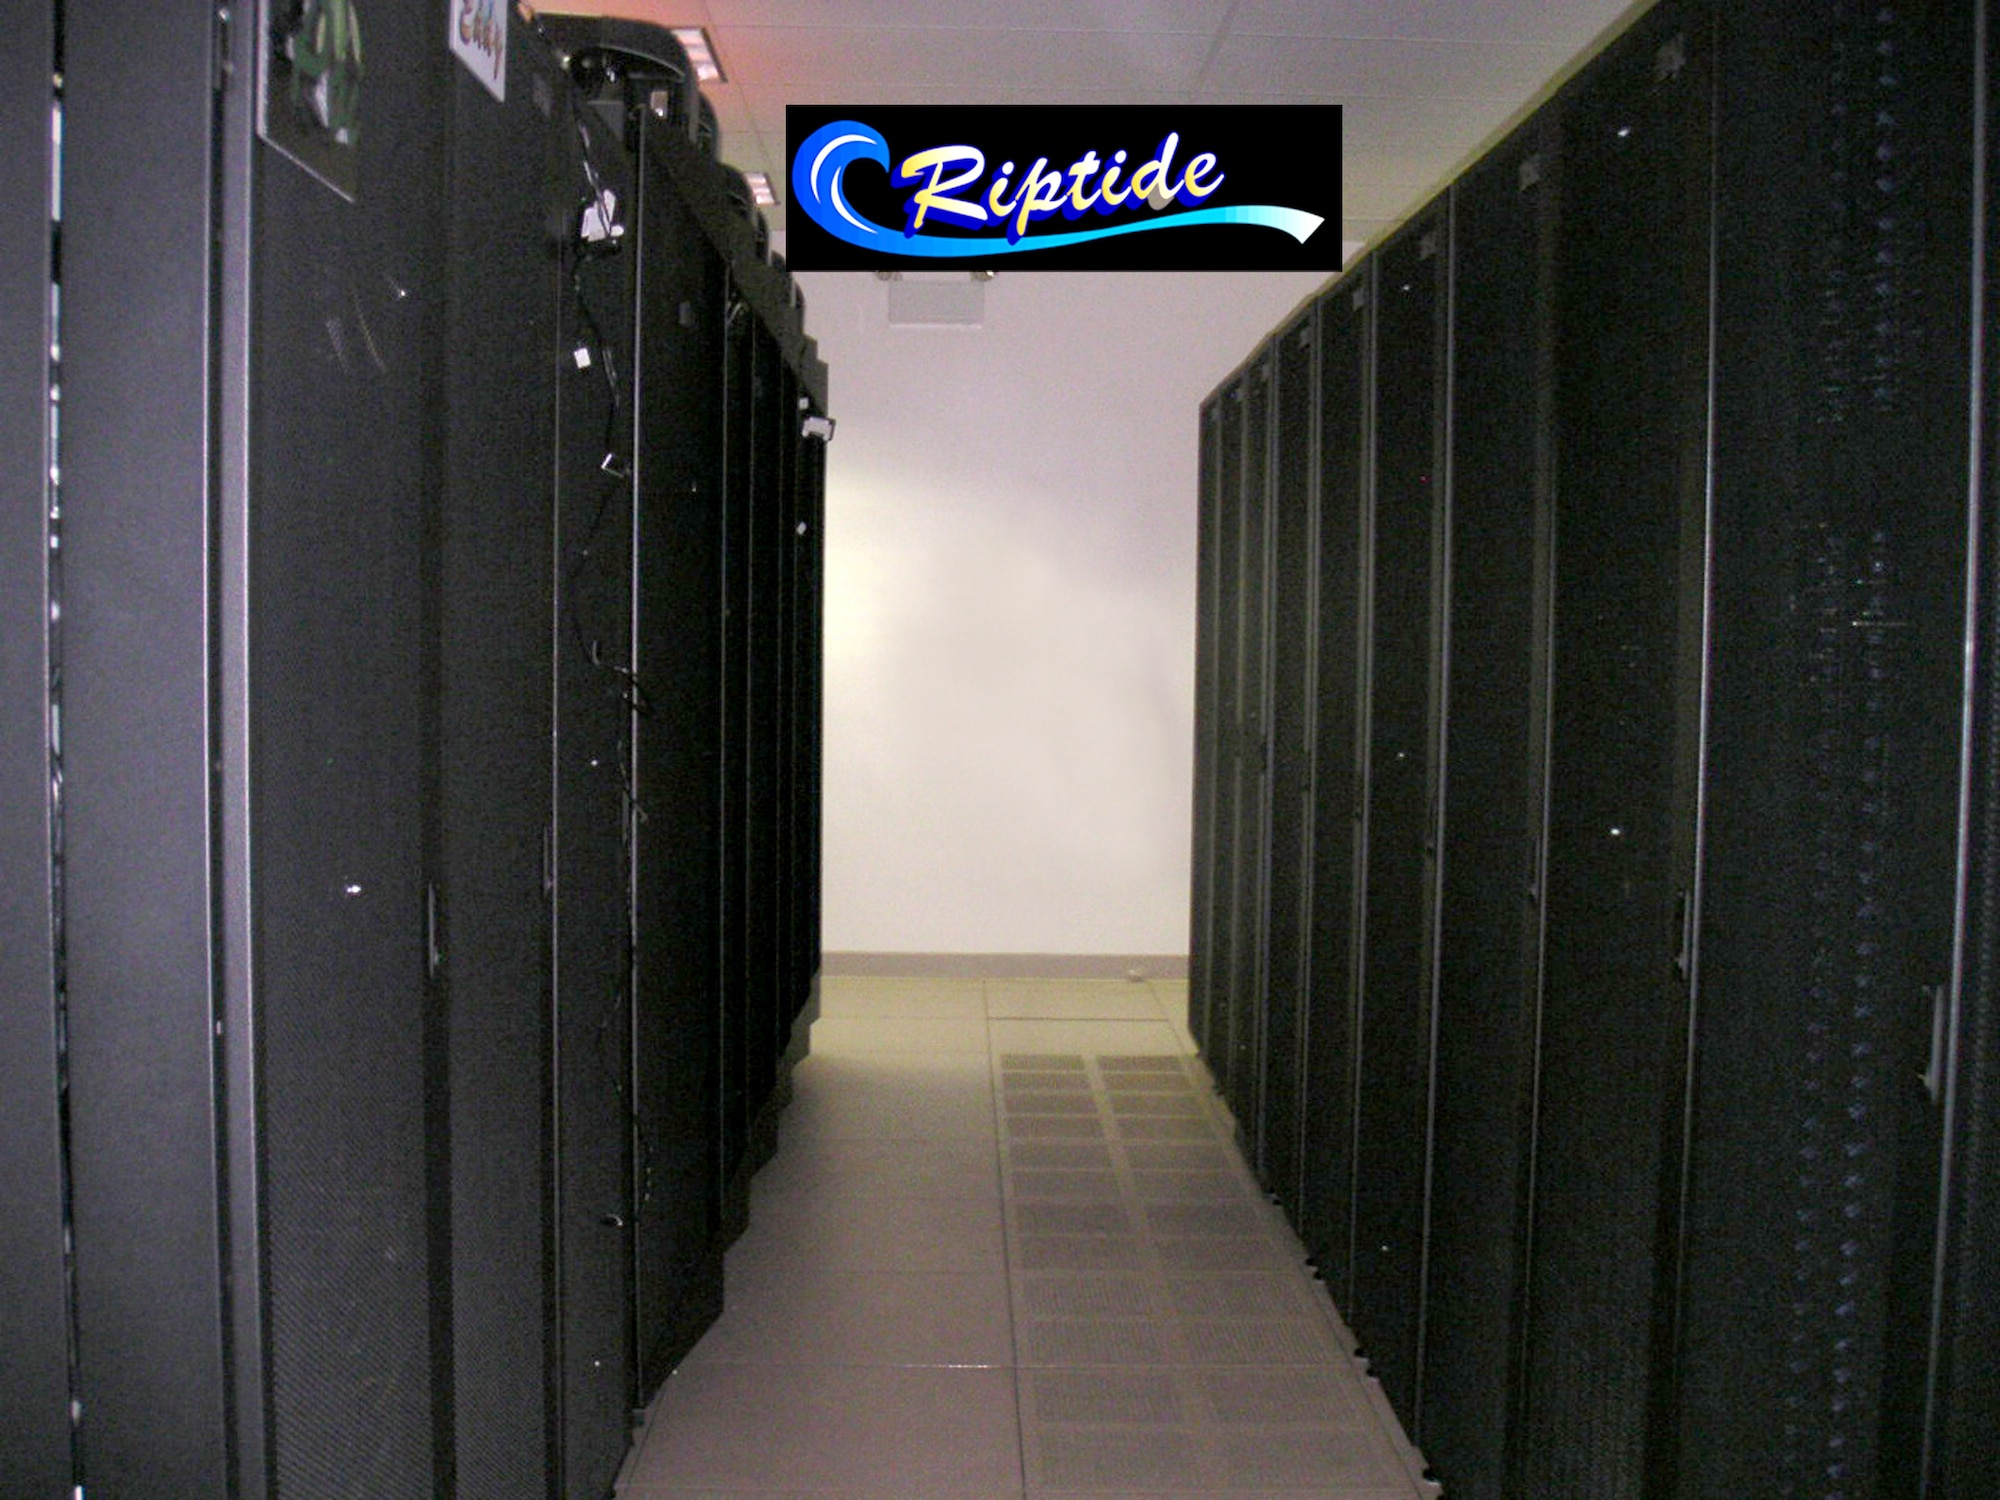 AFRL Maui High Performance Computing Center supercomputer Riptide located at the AFRL Air Force Maui Optical and Supercomputing site, Maui, Hawaii.  MHPCC is one of five DoD High Performance Computing Modernization Program supercomputing resource centers. (AFRL Image)